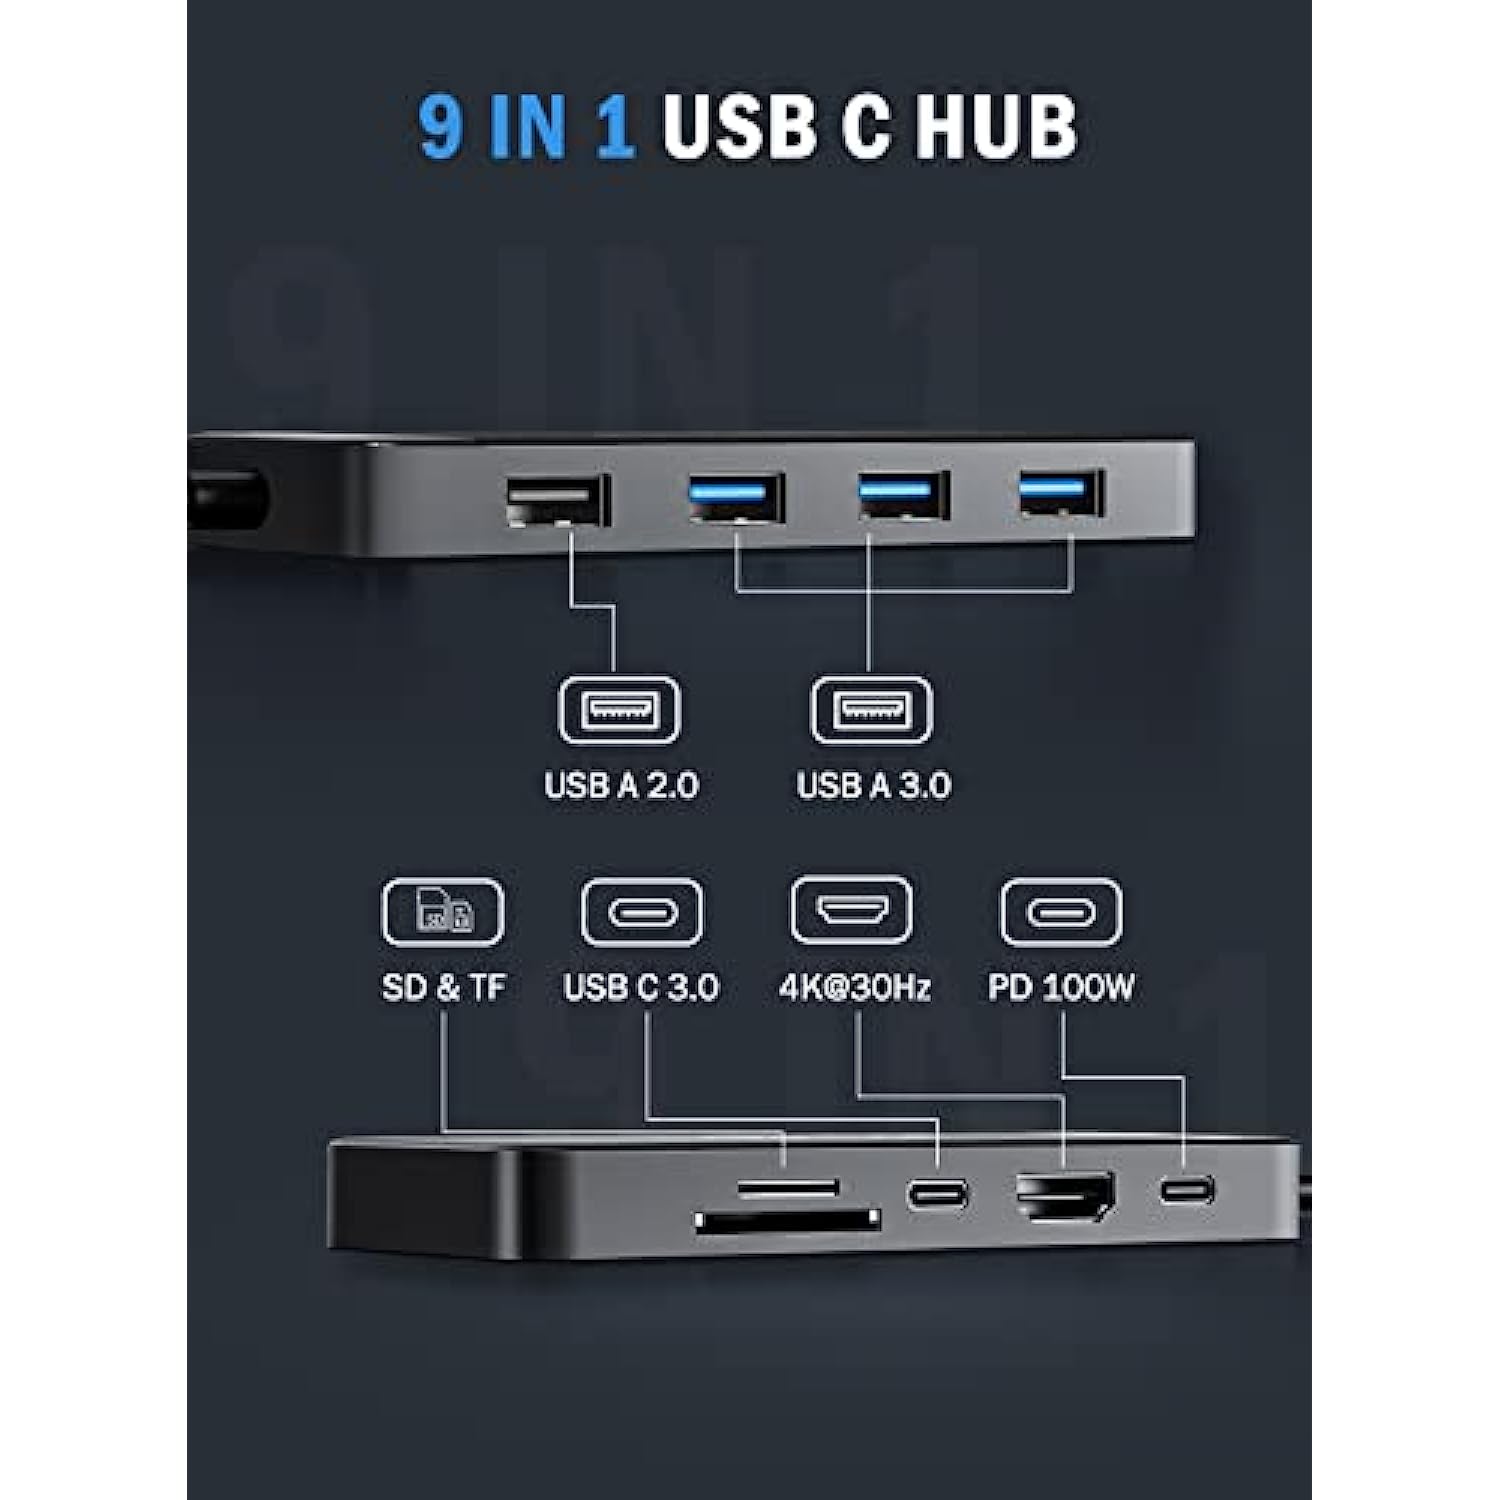 9-in-1 USB C Hub Multiport Adapter 3 USB 3.0 5Gbps Port, Type C Data Port, 100W PD, SD/TF Card Reader Adapter Compatible for Windows/Mac/iPad